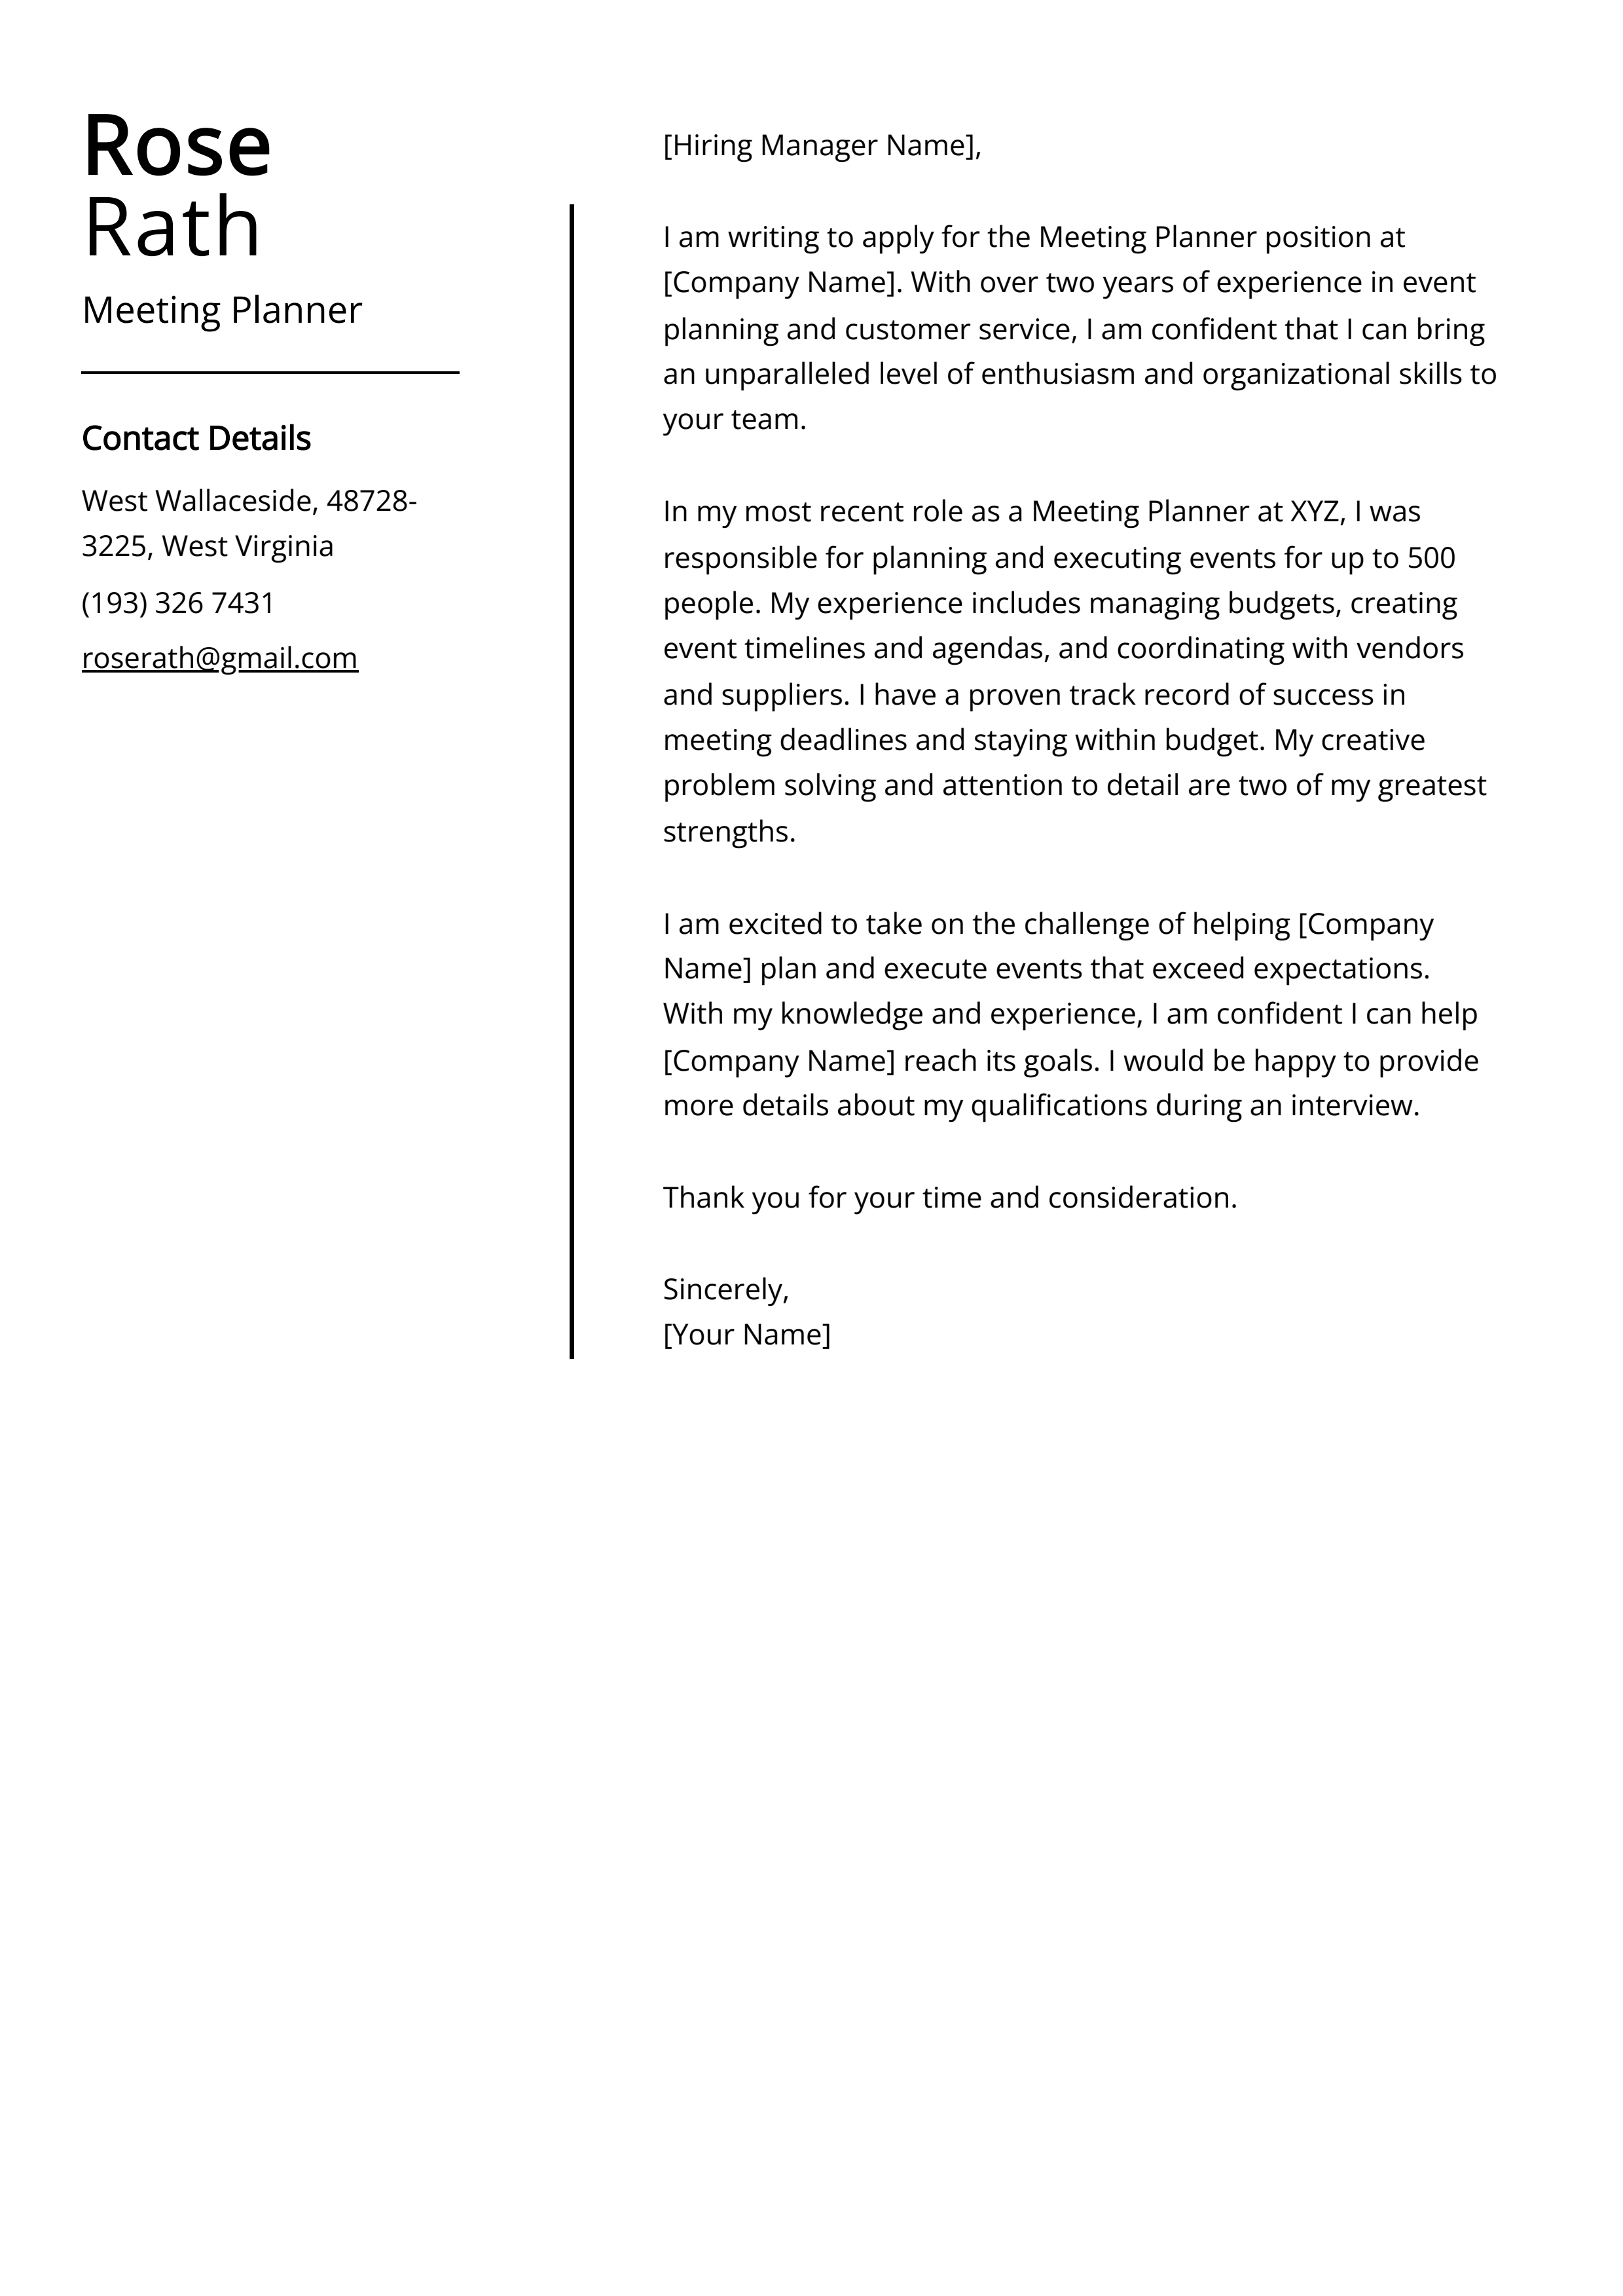 Meeting Planner Cover Letter Example